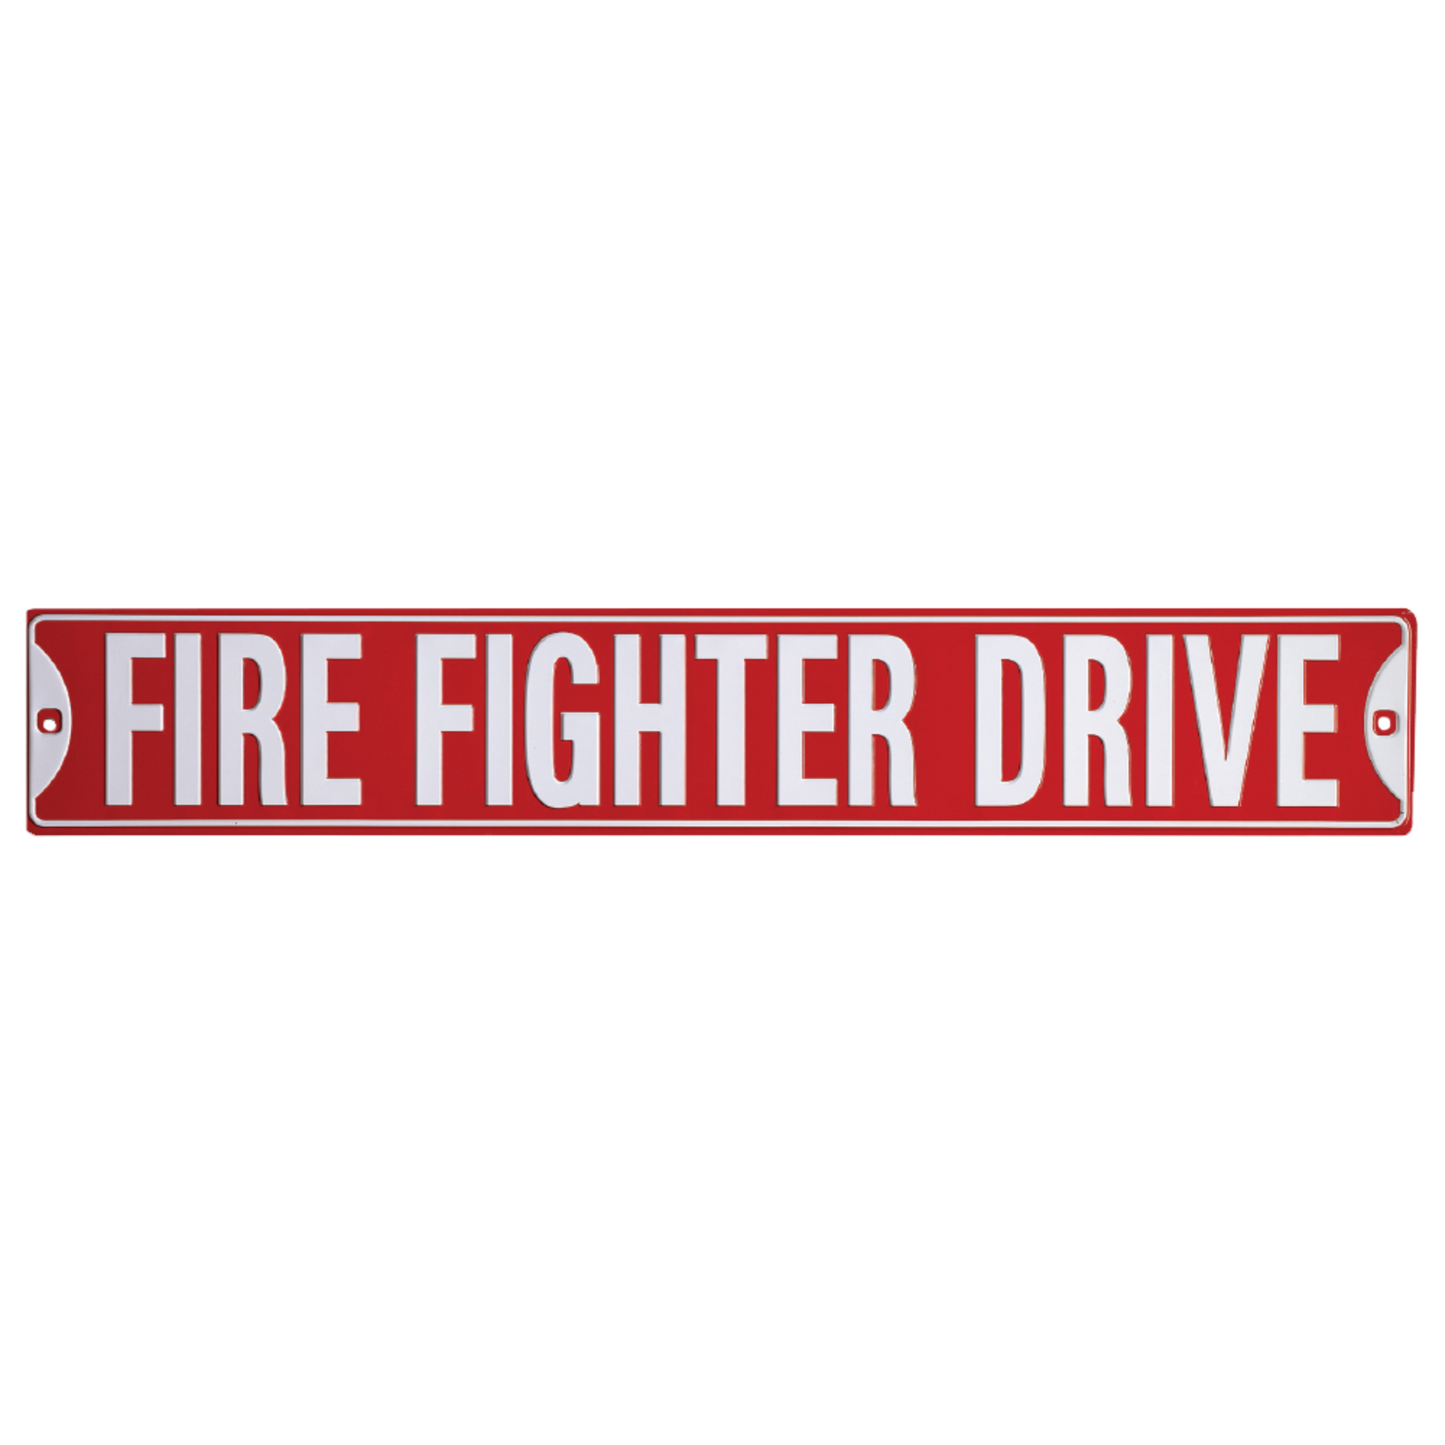 Red and white "FIRE FIGHTER DRIVE" street-style tin sign, honoring first responders.